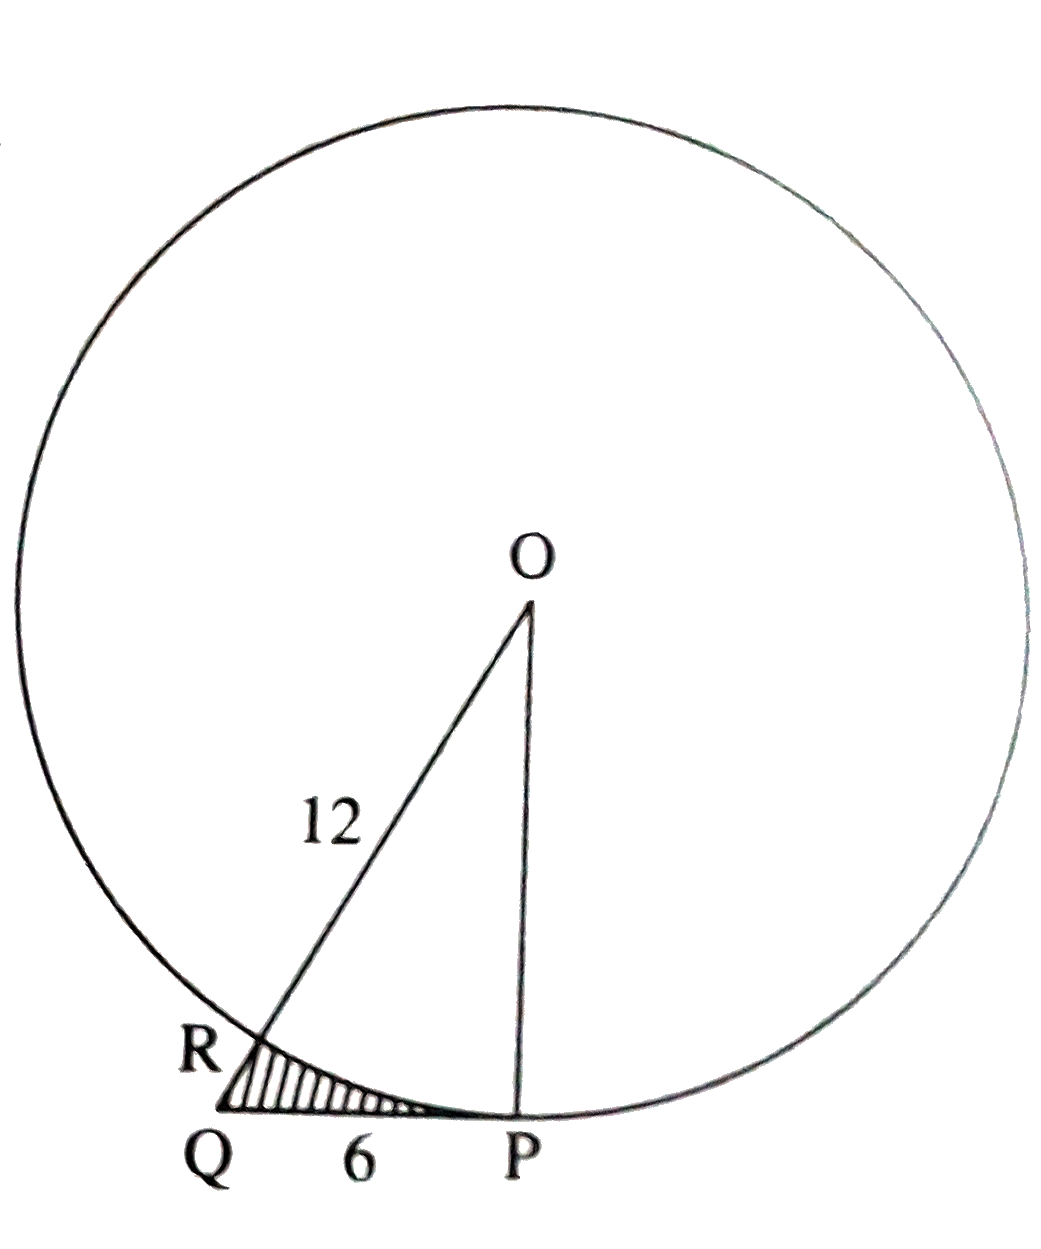 In the figure, PQ is tangent to a circle with centre O. OQ=12, PQ=6. Find the area of the shaded portion